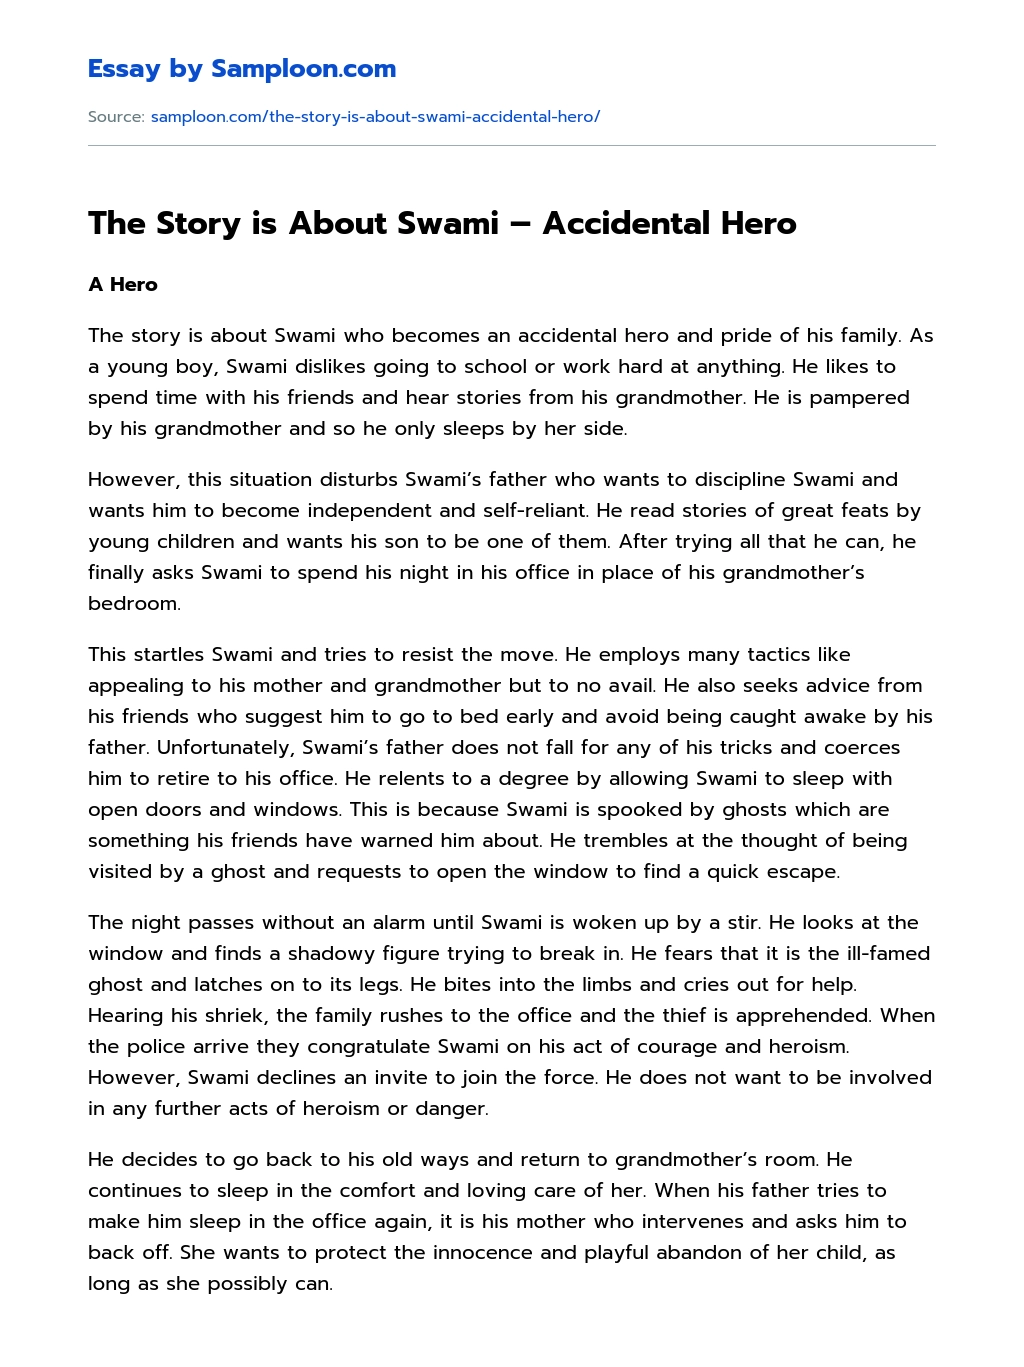 The Story is About Swami – Accidental Hero essay